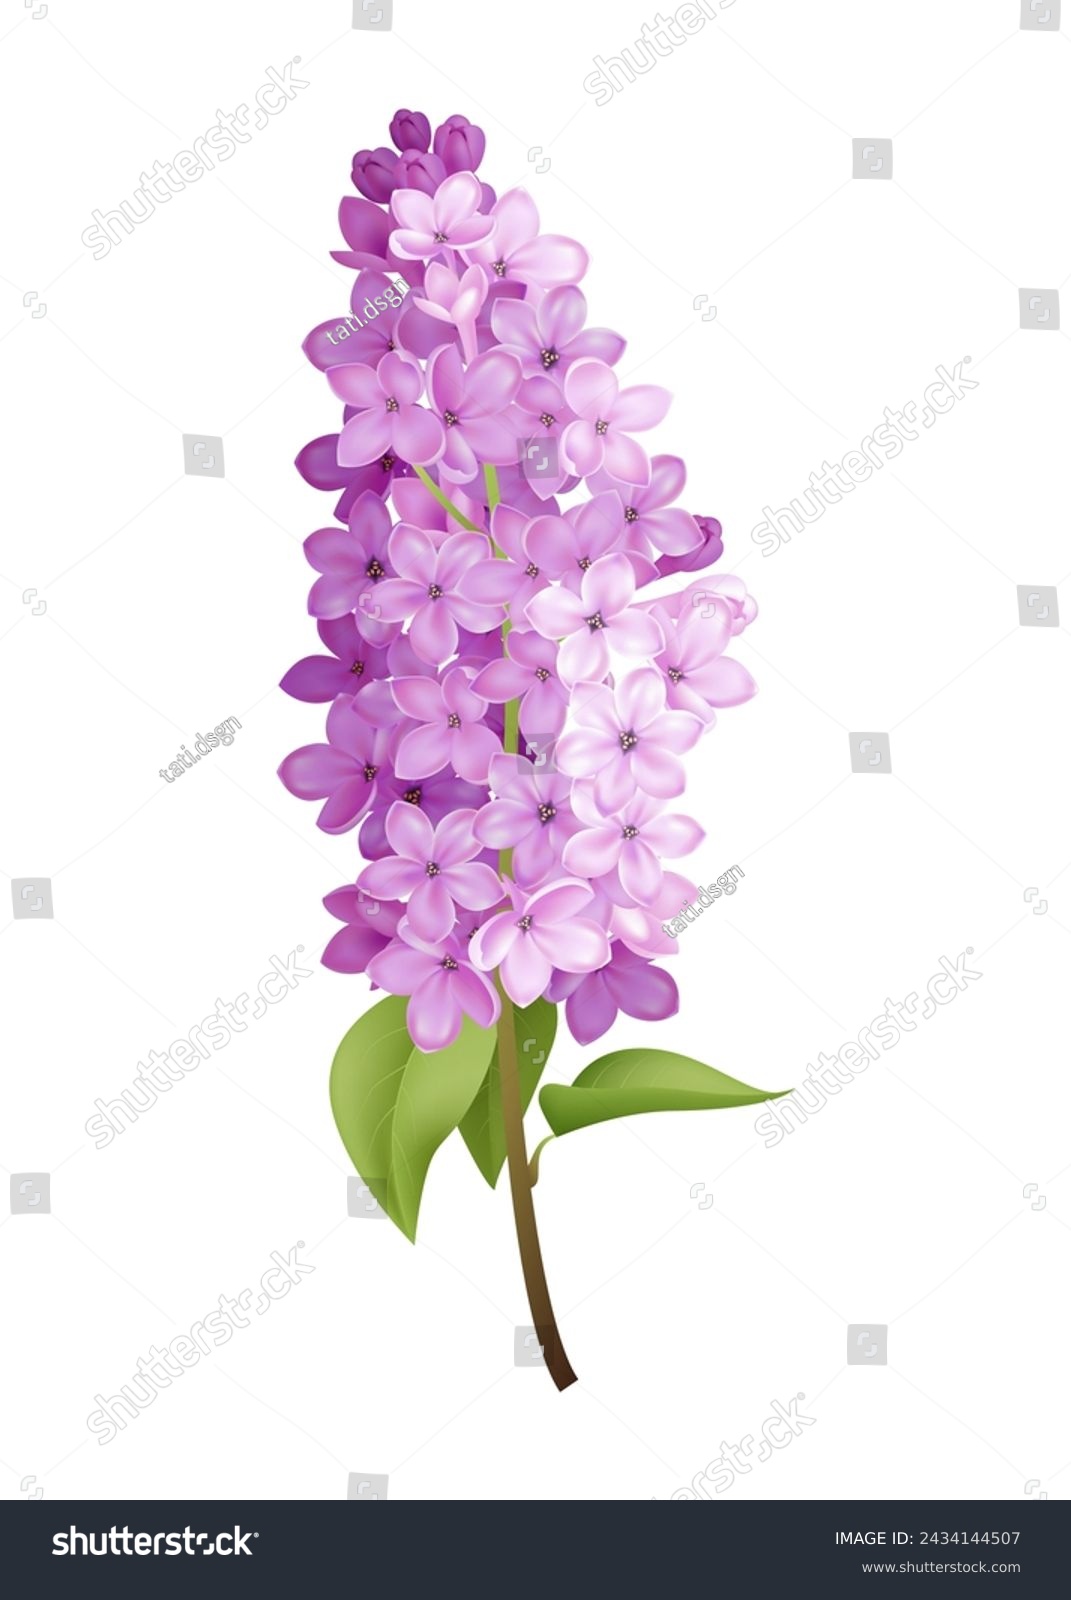 SVG of A beautiful lilac floral branch, perfect for weddings or spring themed designs. The purple blossoms and green leaves create an elegant and romantic botanical motif. Not AI. svg